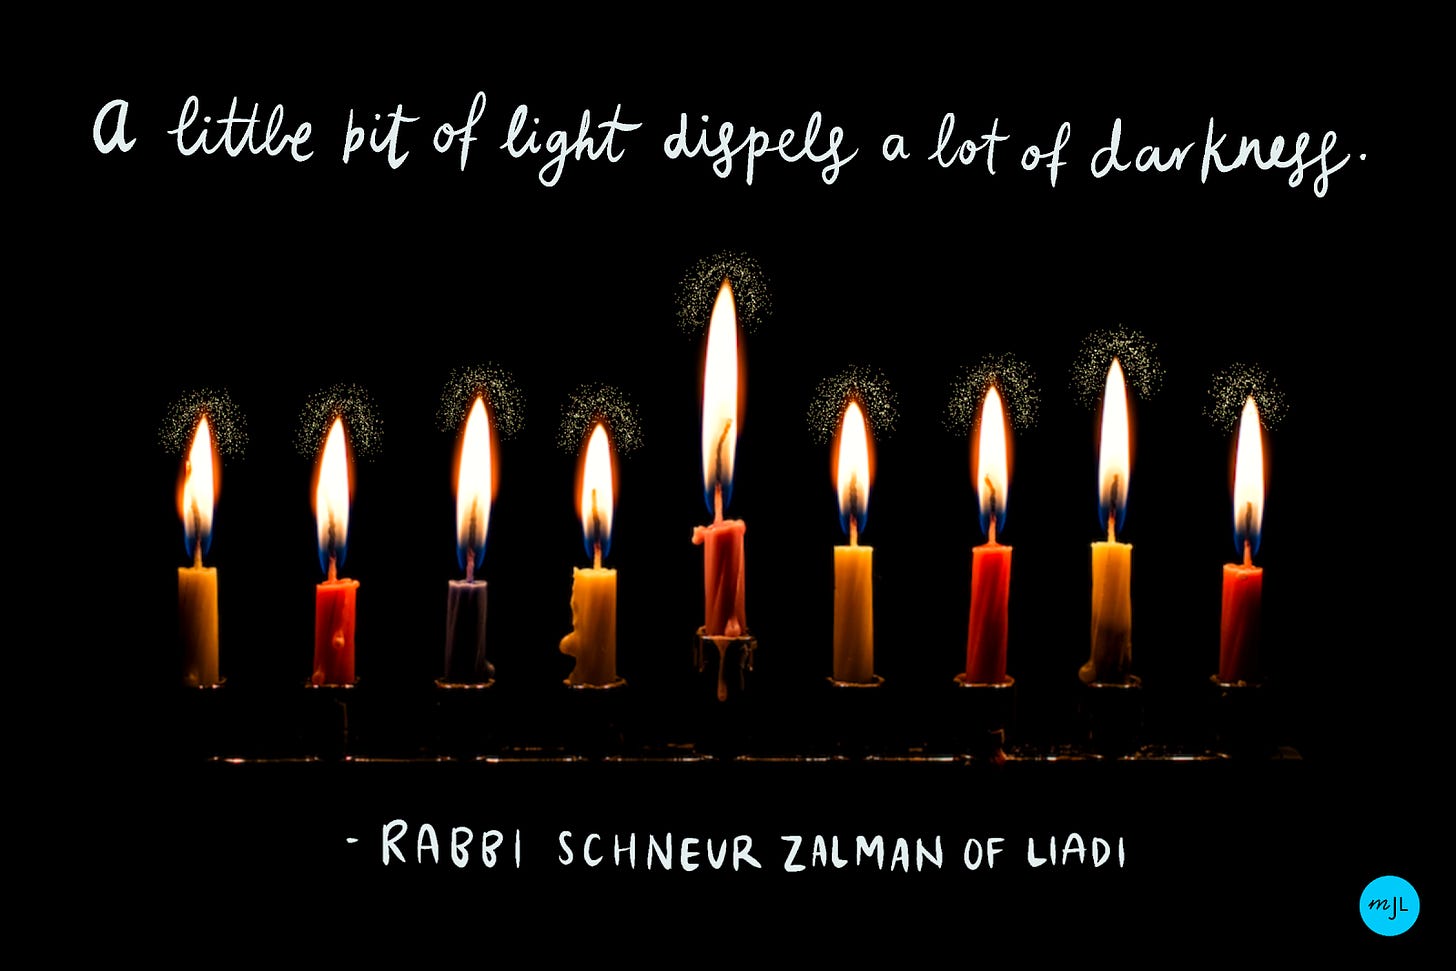 8 Uplifting Hanukkah Quotes to Light Up Your Holiday This Year | My Jewish Learning